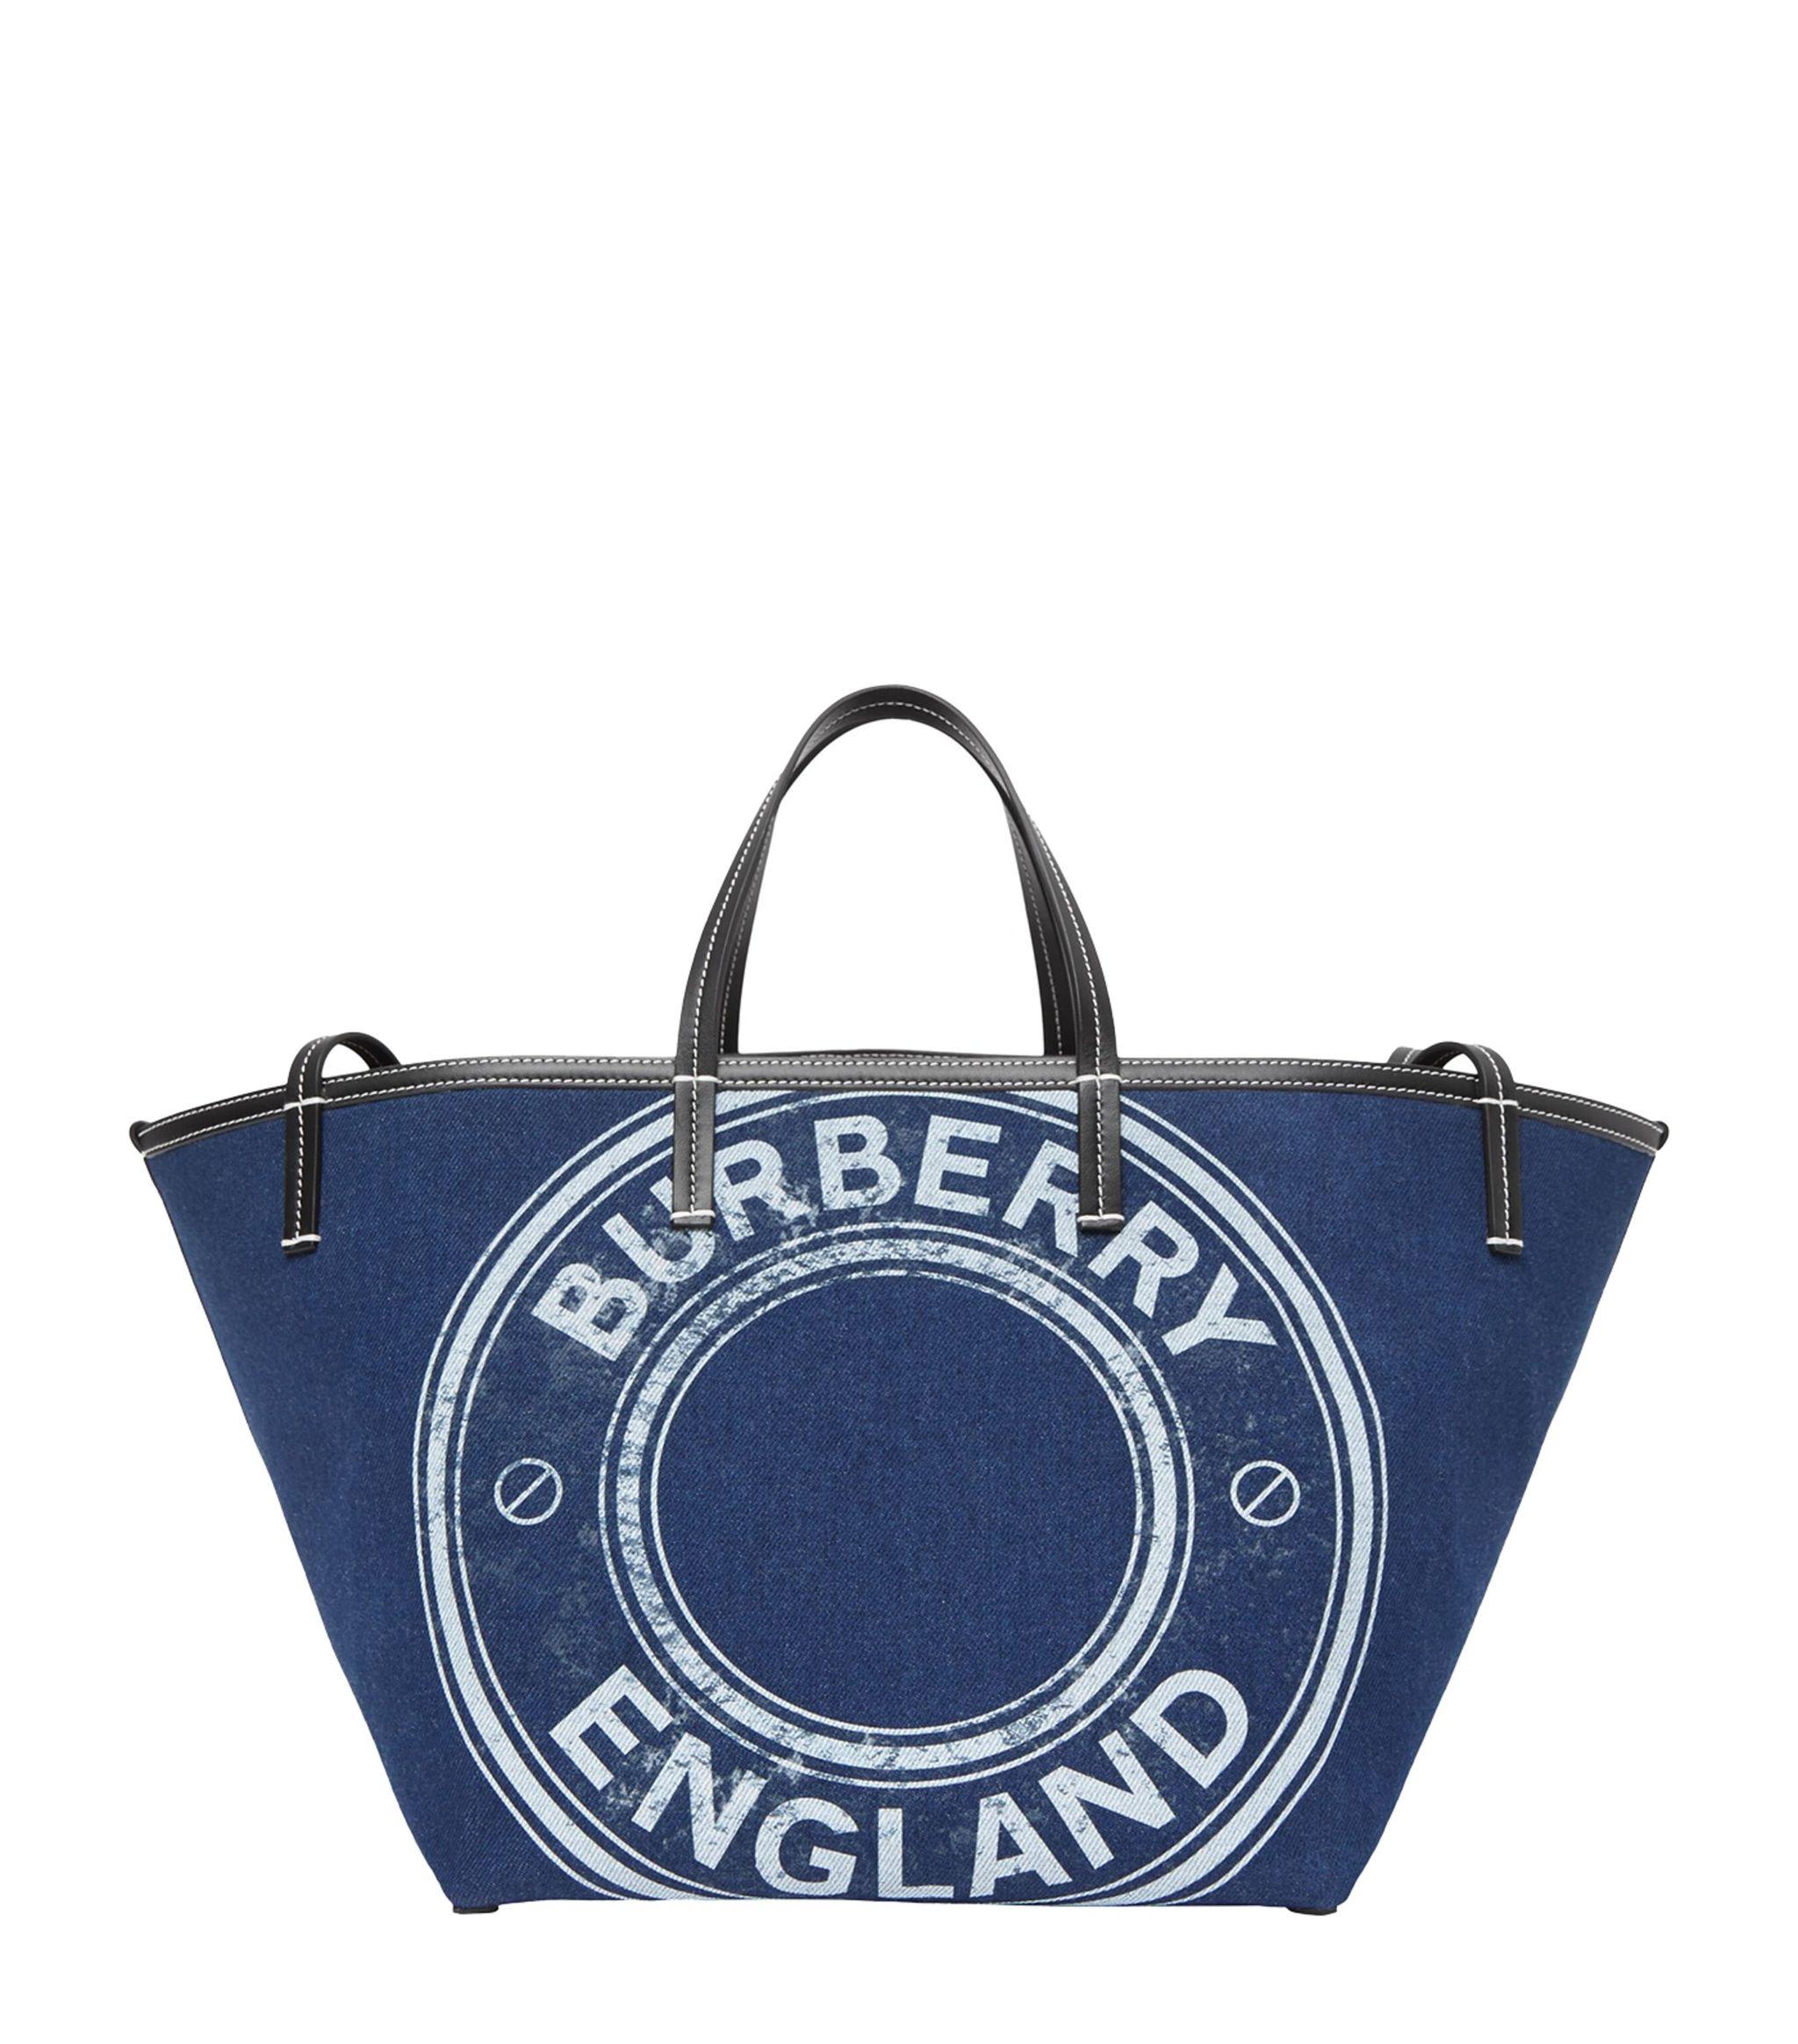 Burberry Blue Label Small Tote Bag One Size -  Israel